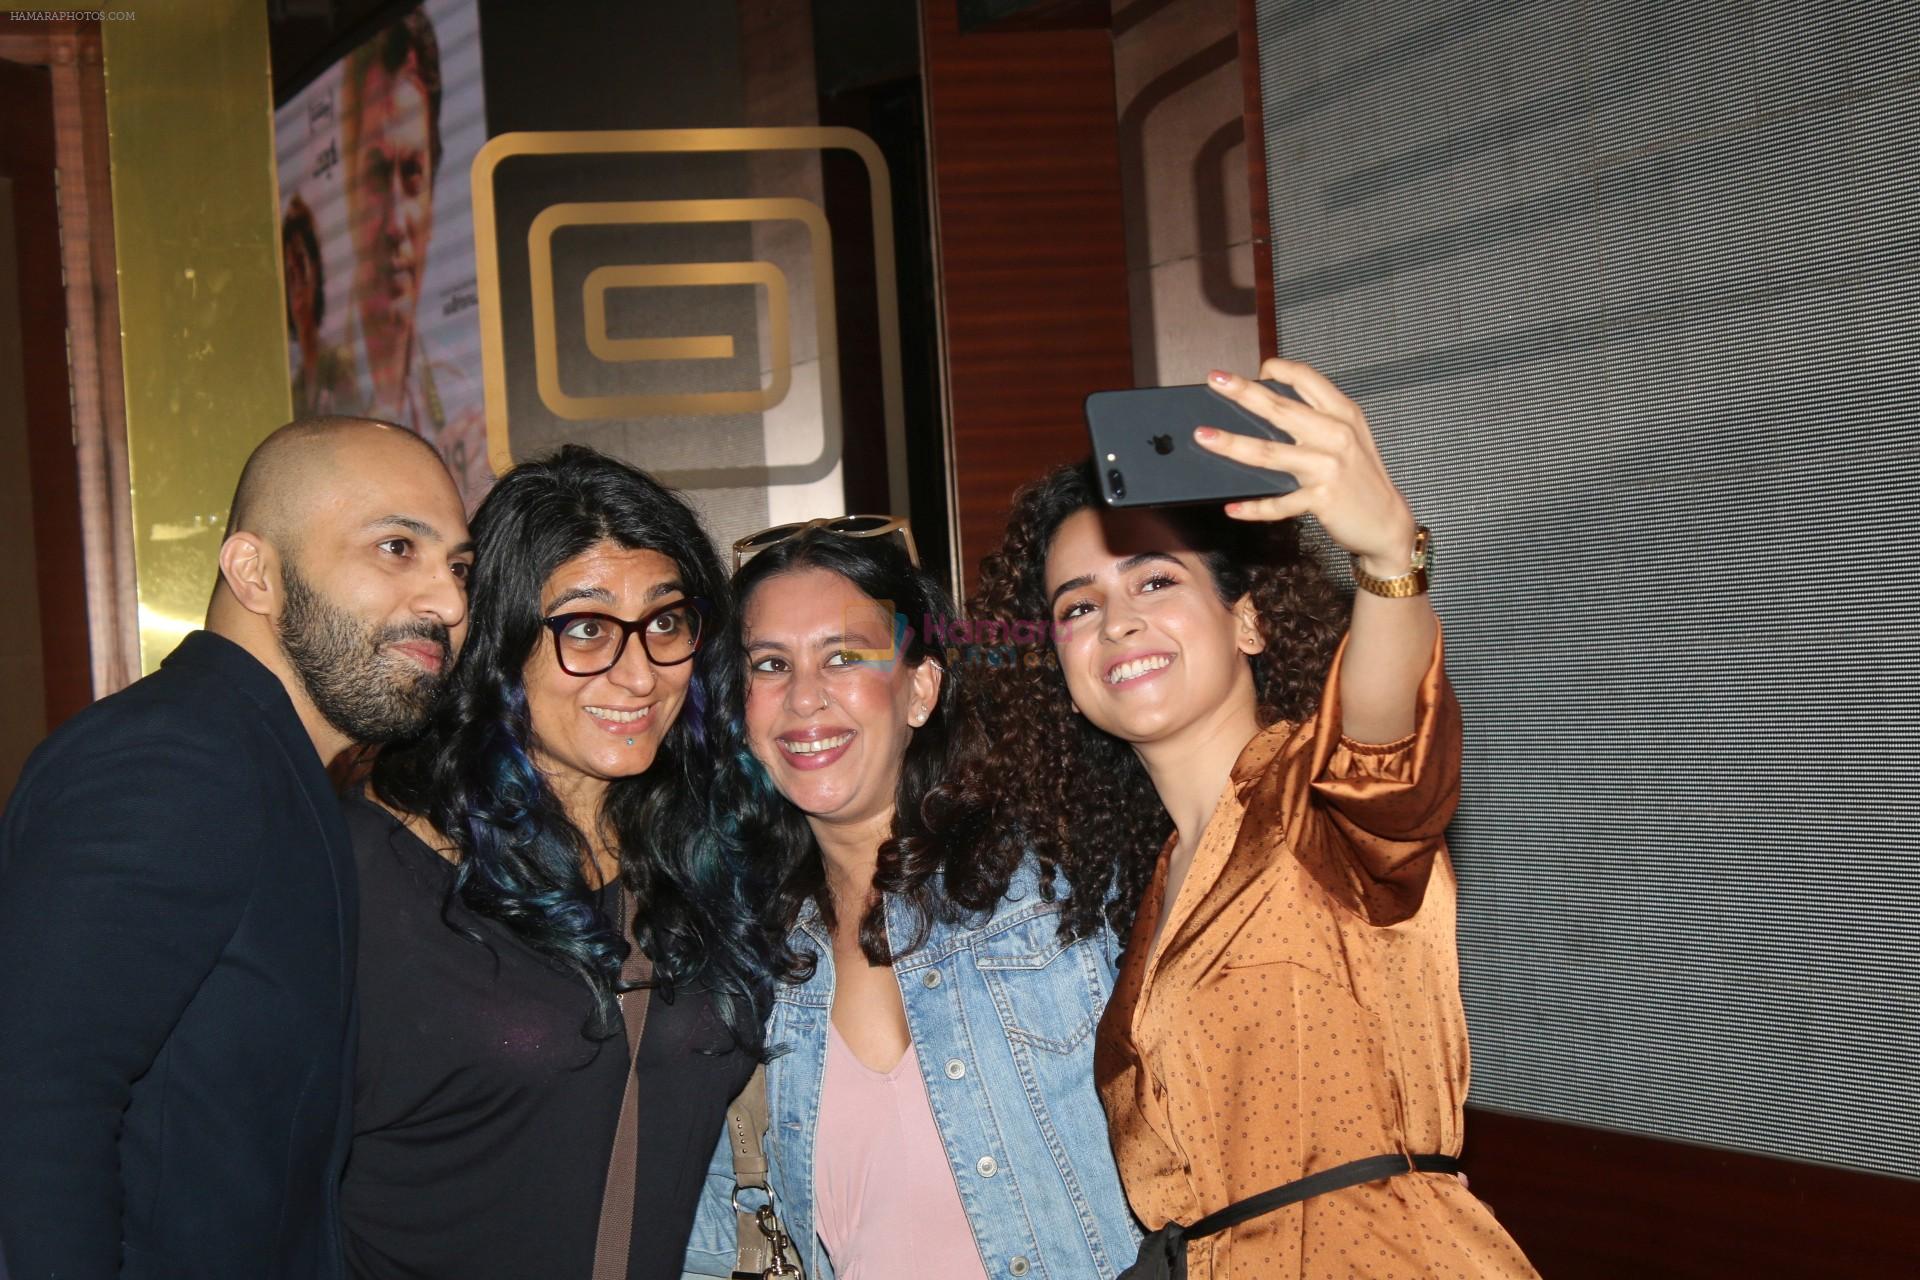 Sanya Malhotra & director Ritesh Batra at the trailer launch of their film Photograph at The View in andheri on 19th Feb 2019